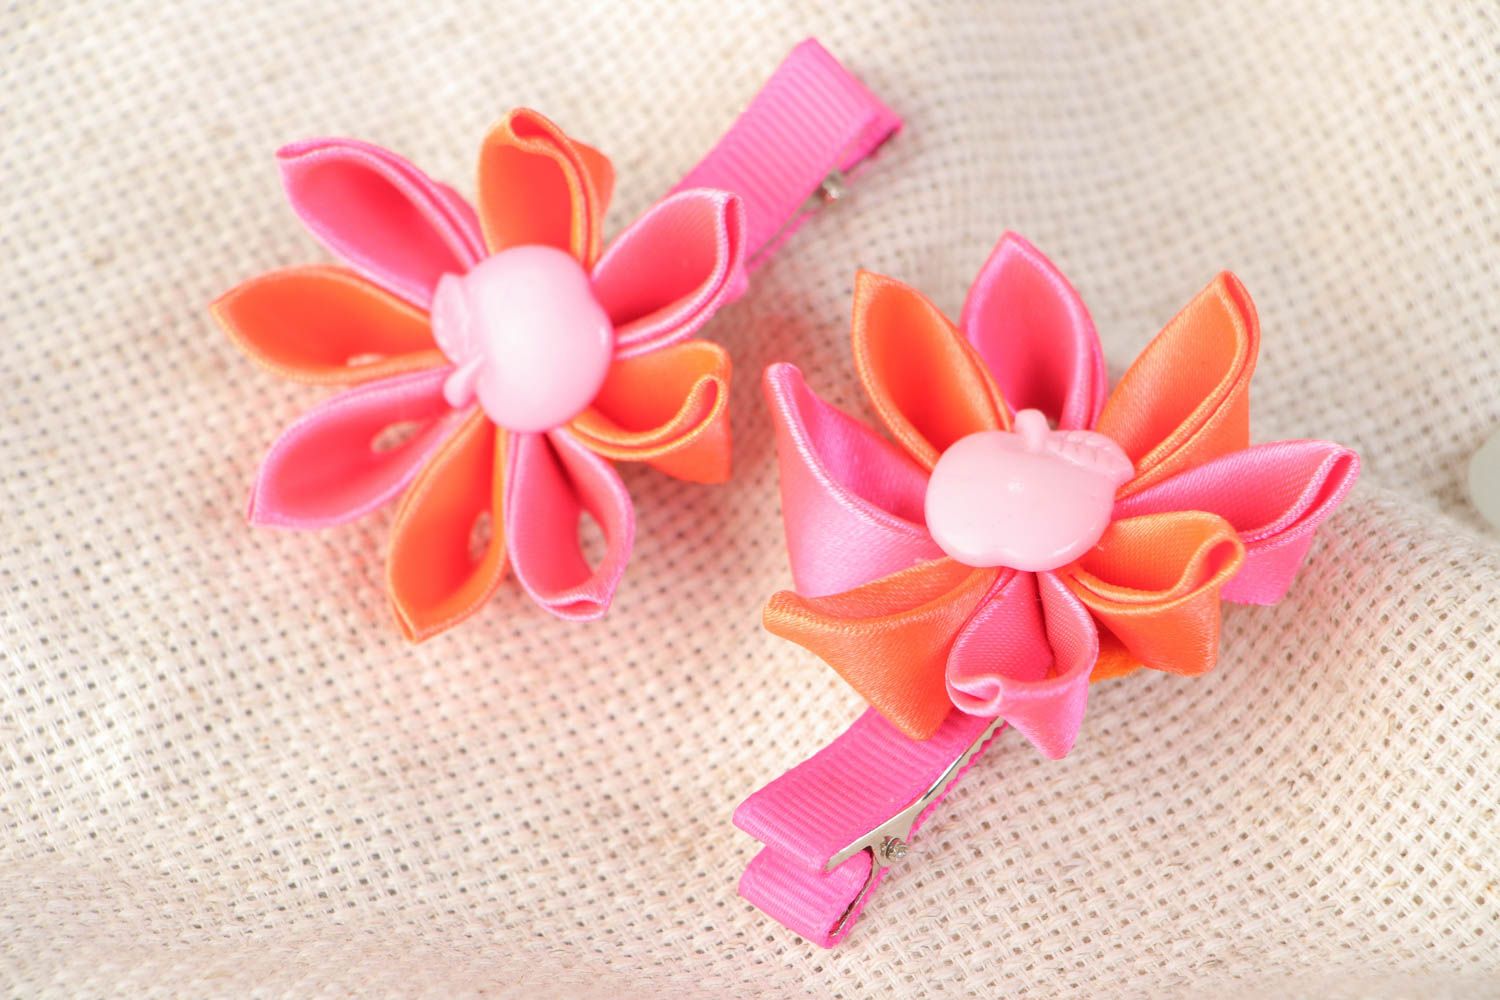 Handmade hair clips with orange and pink kanzashi flowers for kids set of 2 items photo 1